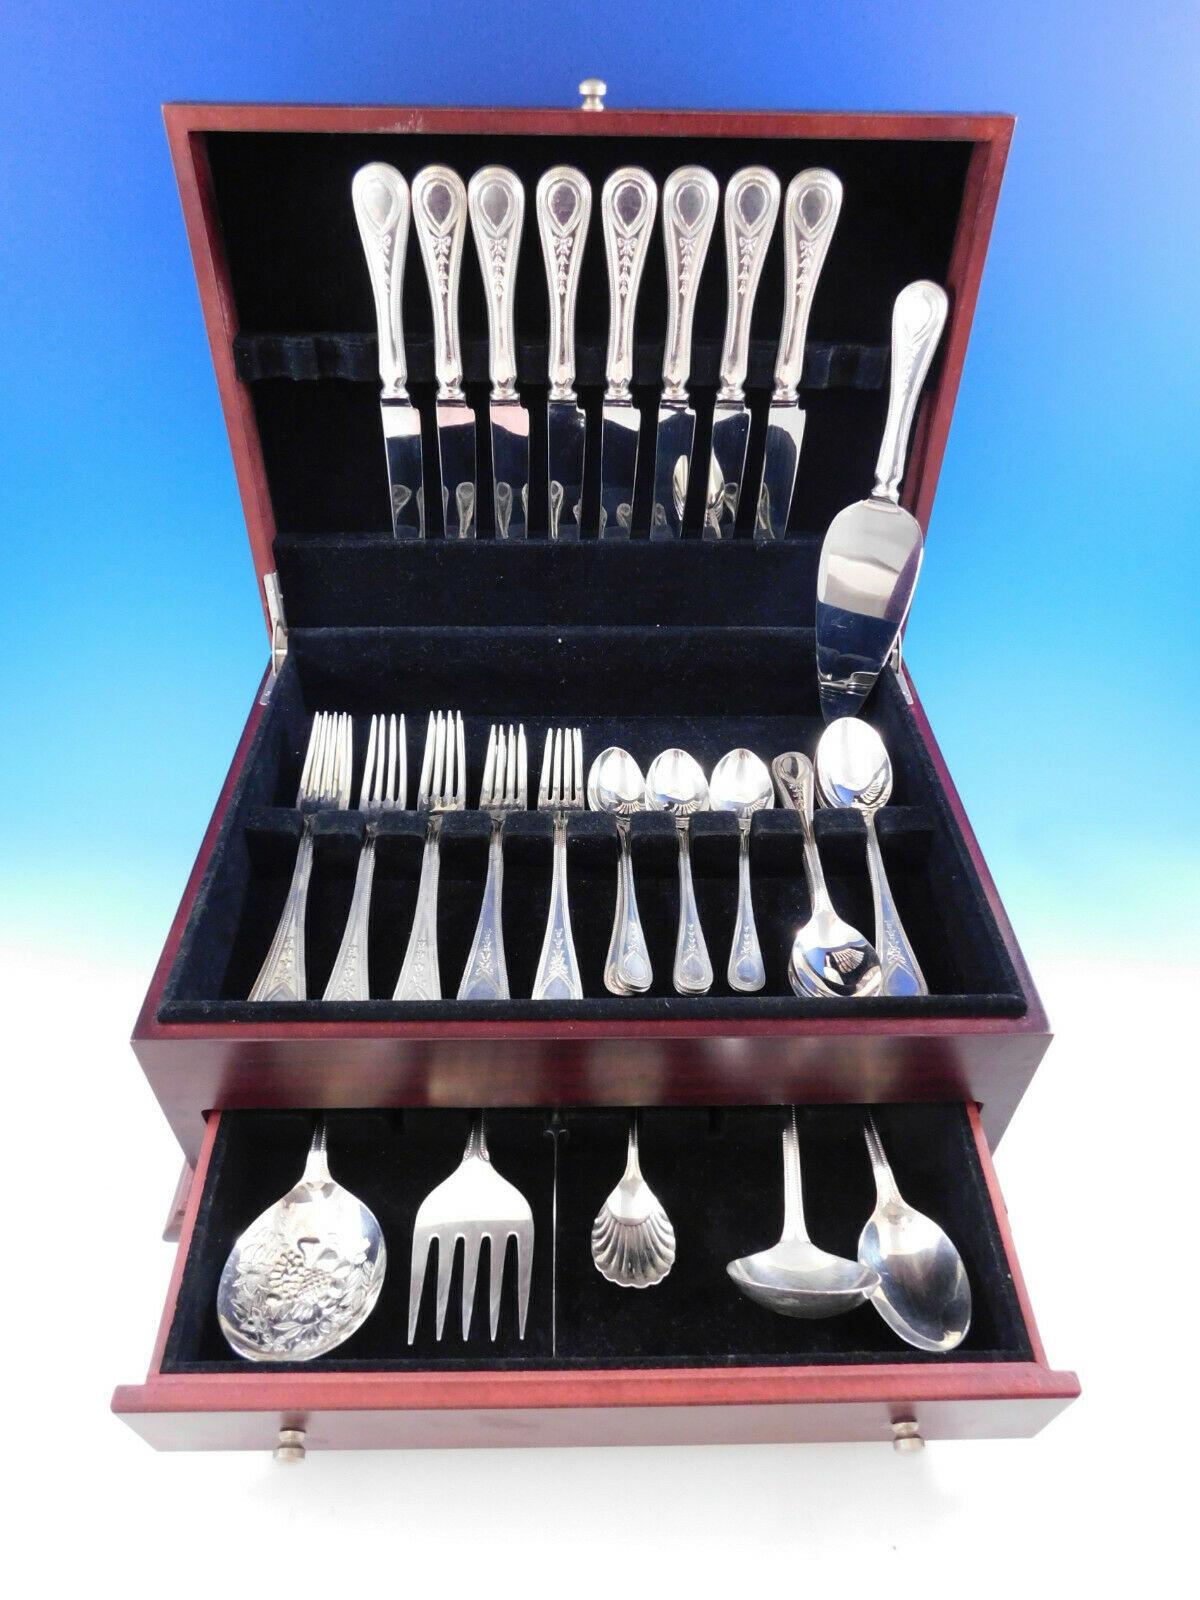 Gorgeous dinner size Victorian bead by Carrs England sterling silver cutlery set, 47 pieces. This set includes:

8 dinner size knives, 9 3/4